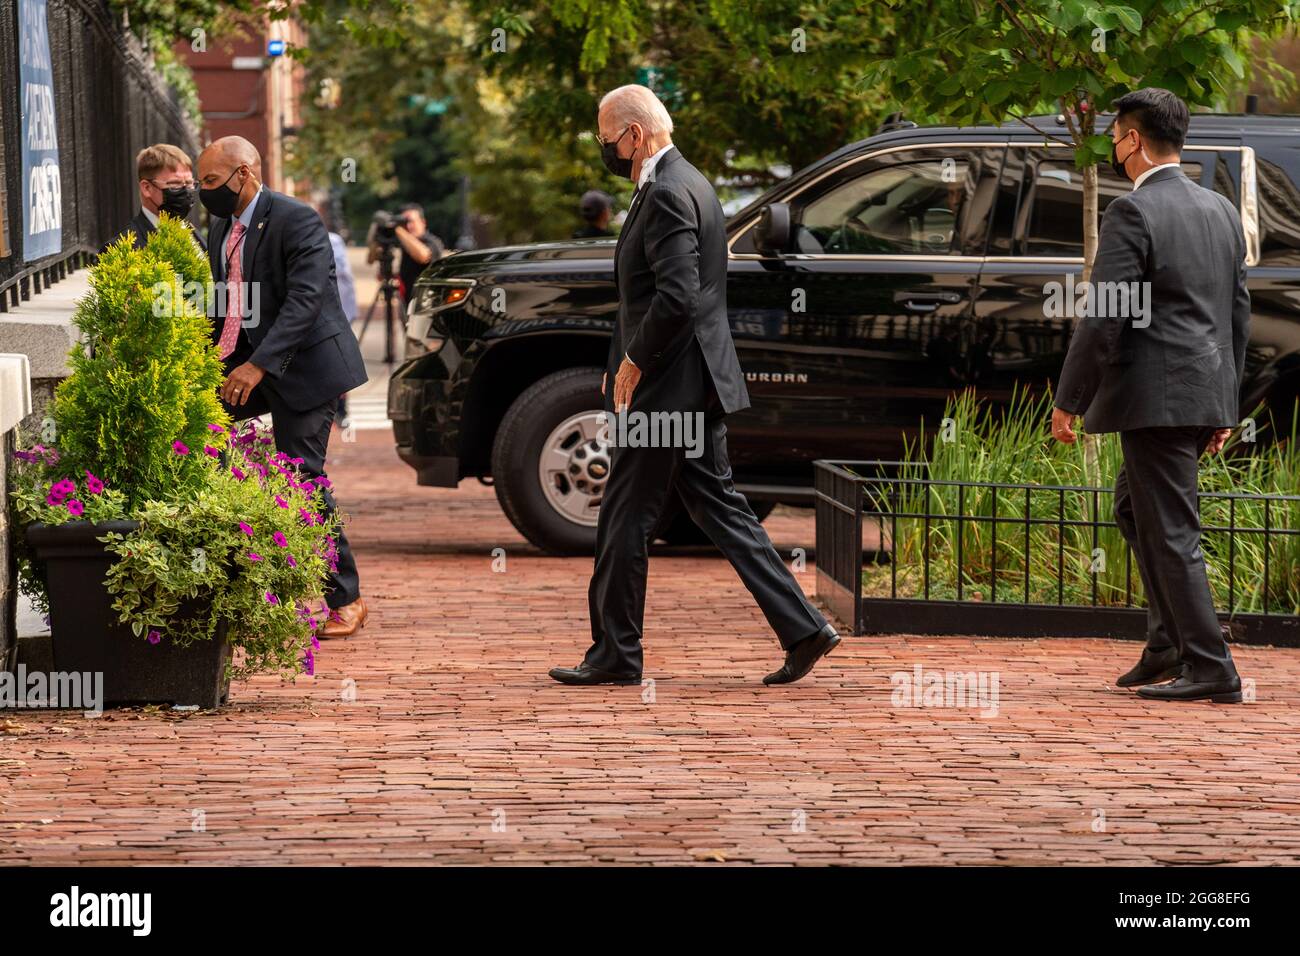 United States President Joe Biden walks into Holy Trinity Catholic Church for mass in the Georgetown neighborhood of Washington, DC, Sunday, August 29, 2021. President Biden earlier attended a dignified transfer in Dover, Delaware for 13 members of the US military who were killed in Afghanistan last week and gave an update on Hurricane Ida from FEMA headquarters. Credit: Ken Cedeno/Pool via CNP /MediaPunch Stock Photo